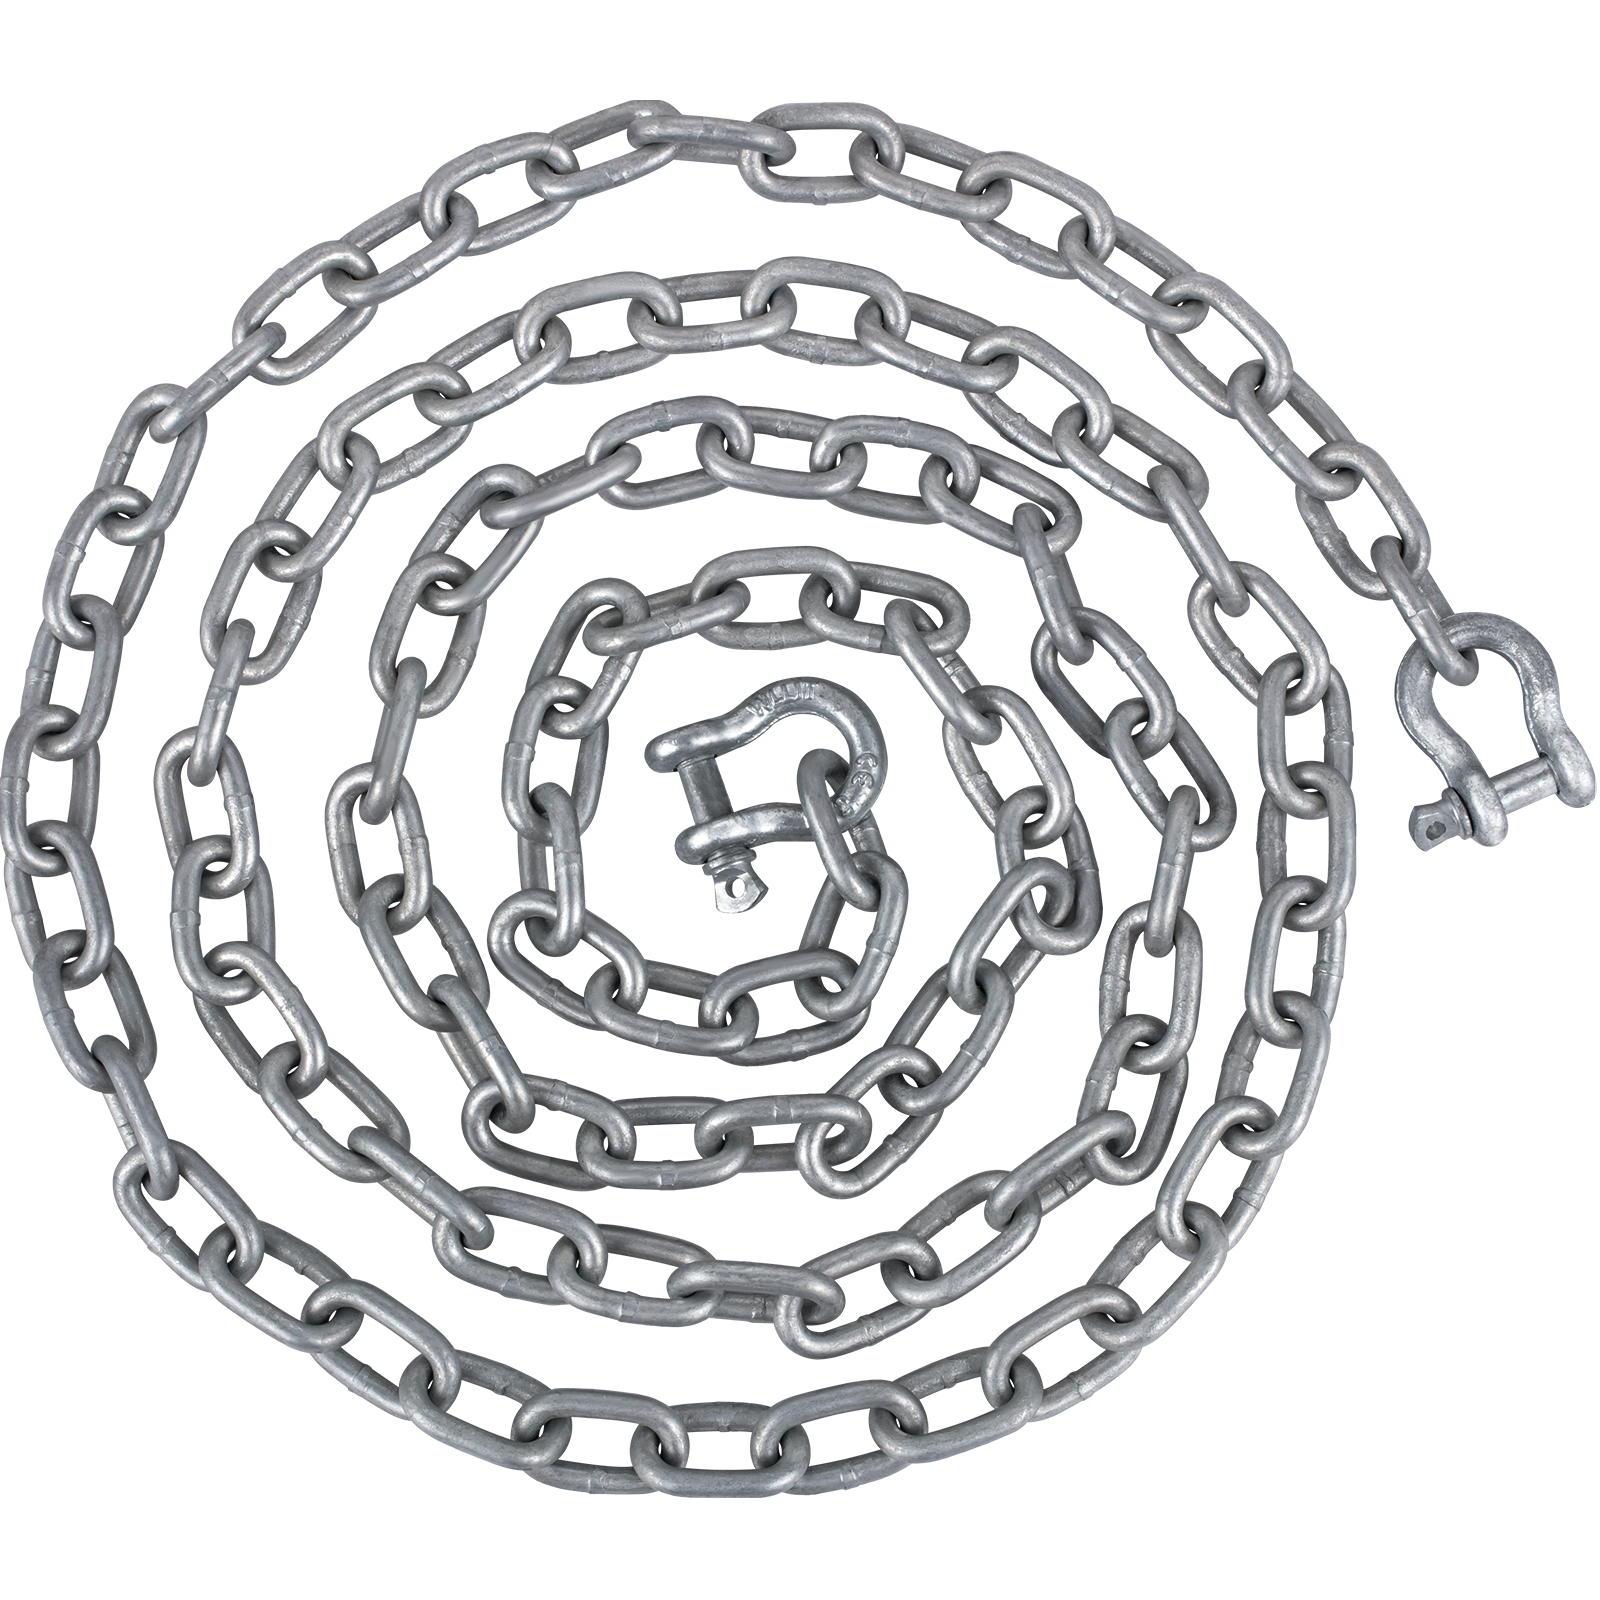 boat anchor chain,10ft,galvanized